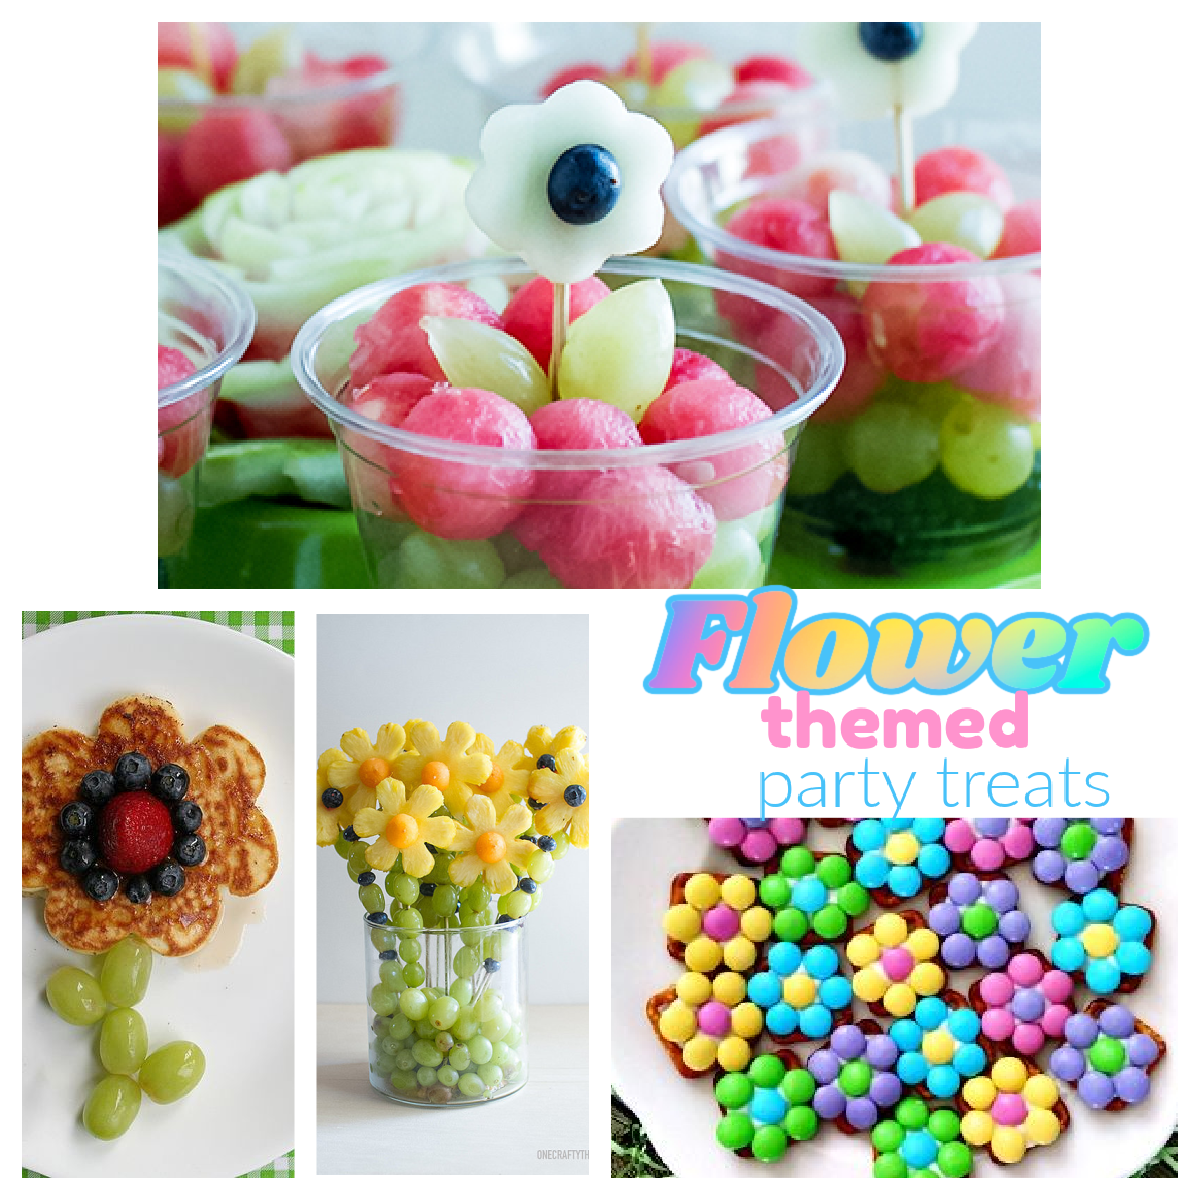 Flower Fun Food Ideas For Kids on Mother’s Day Round Up